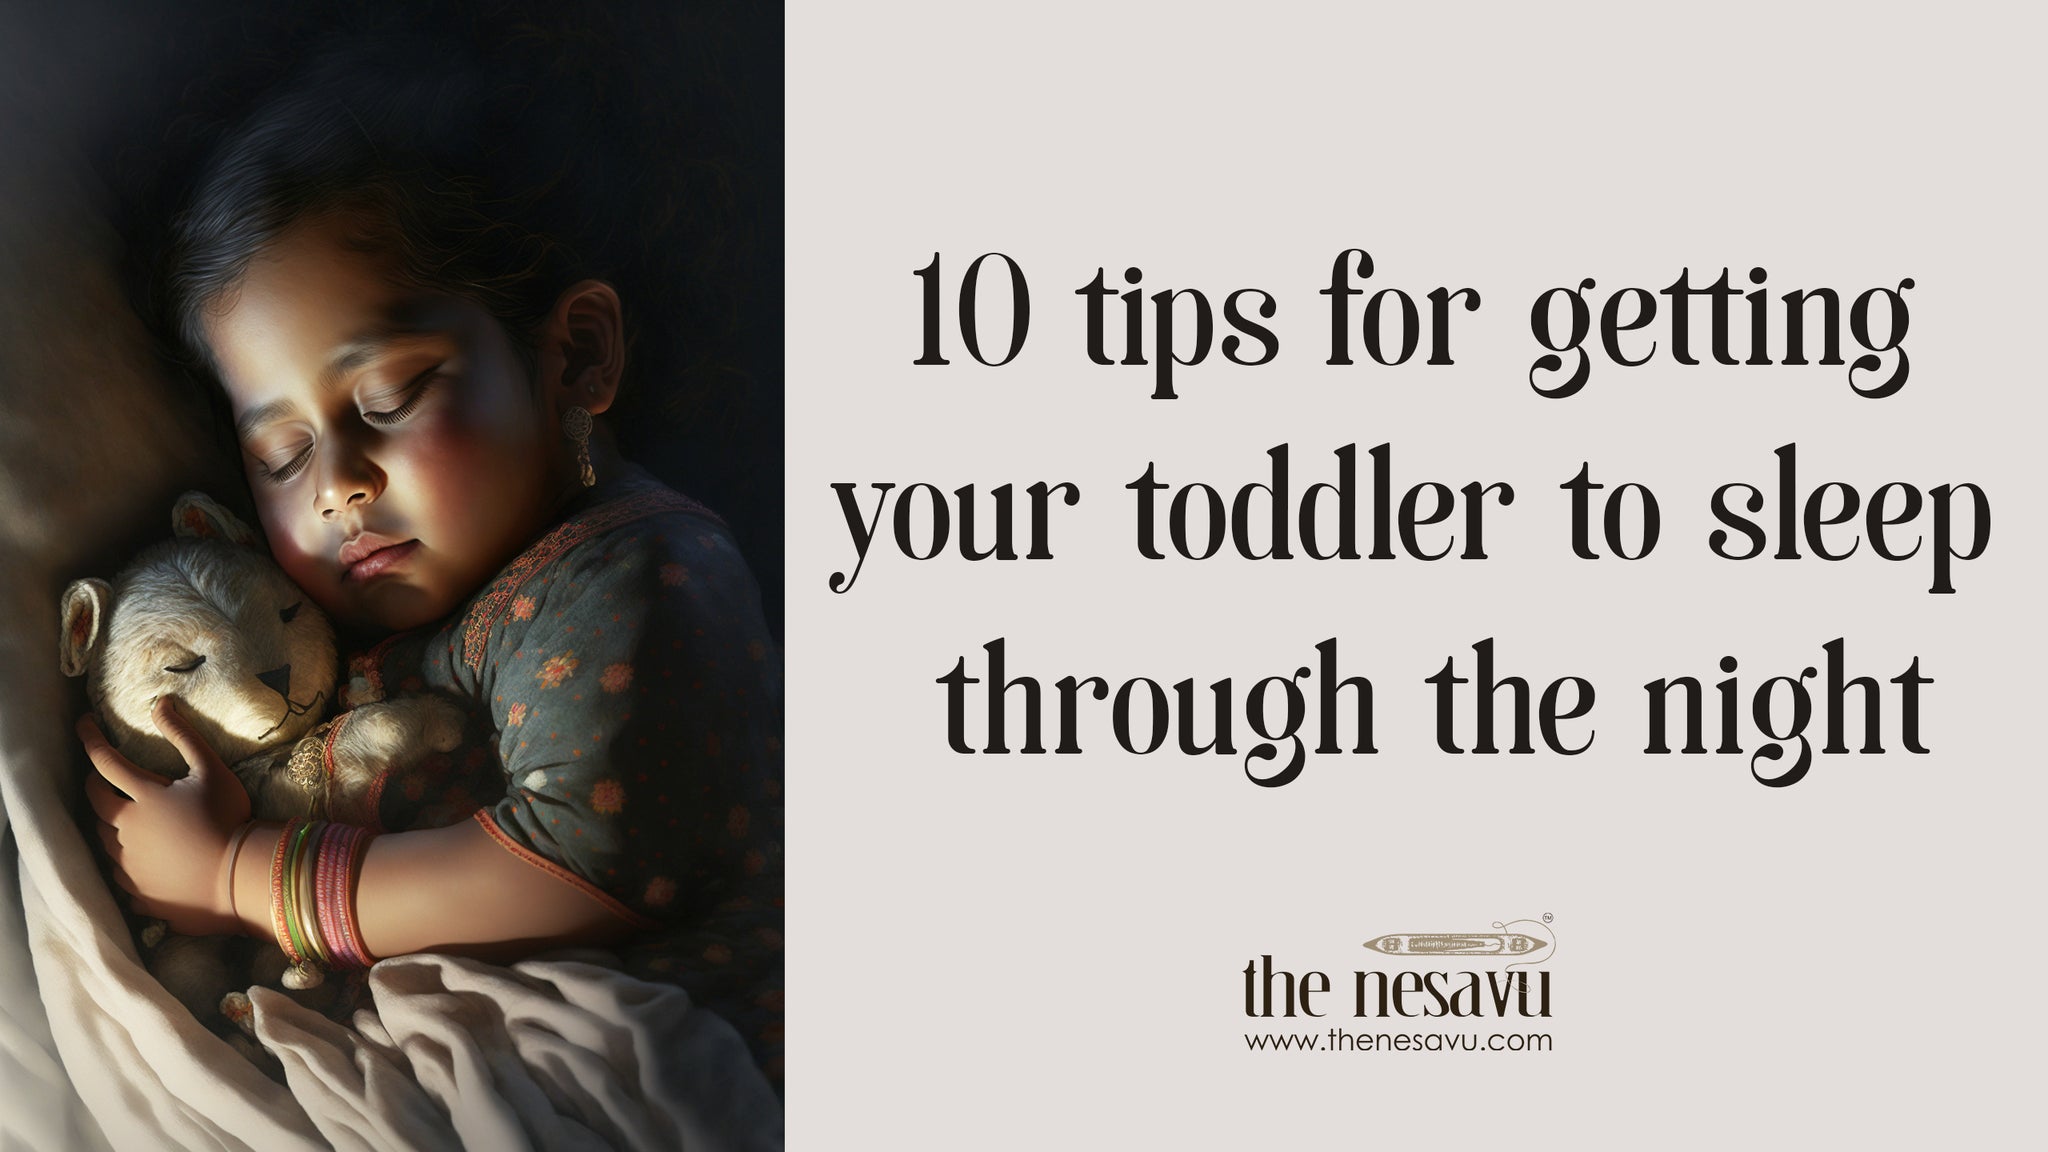 Nesavu's 10 tips for getting your toddler to sleep through the night